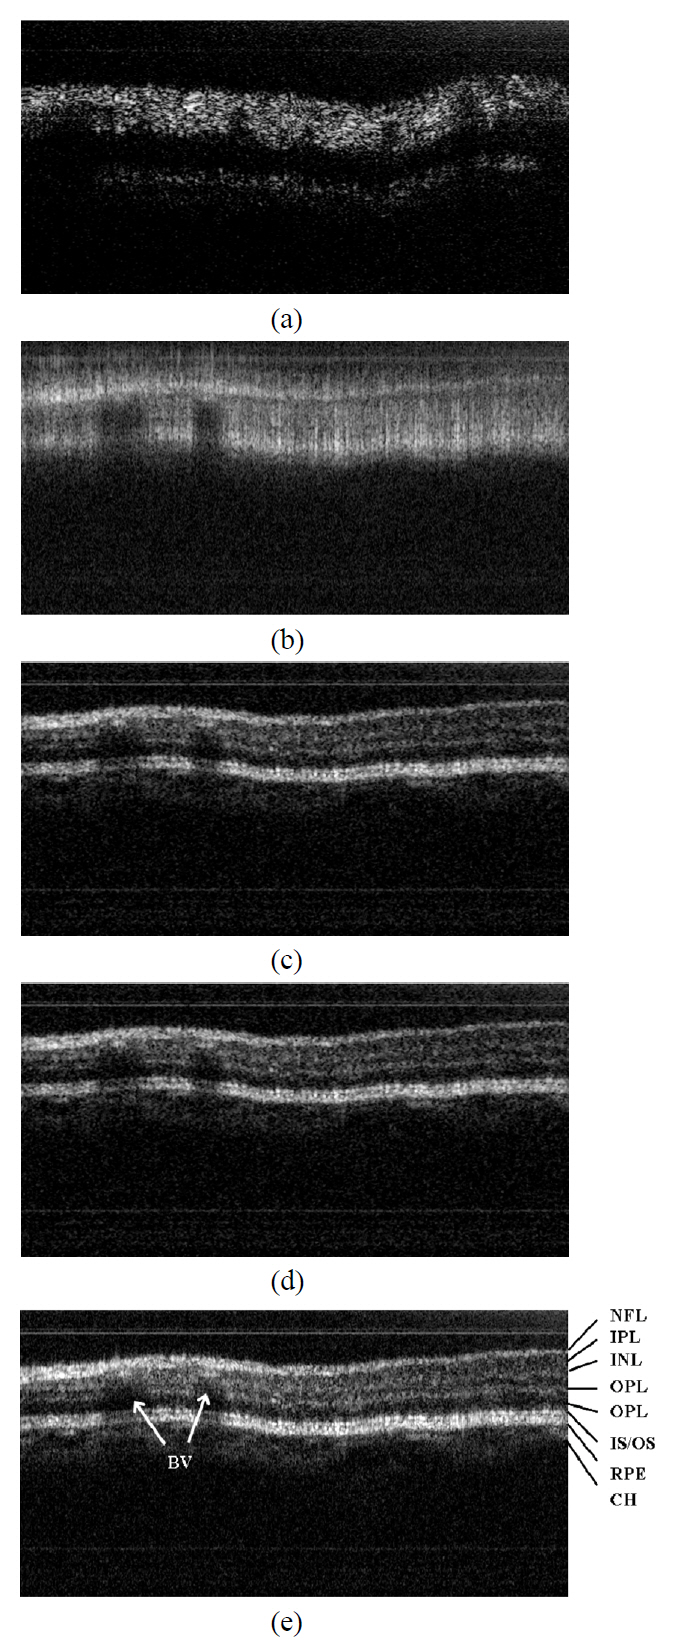 Retinal images of a healthy volunteer. (a) OCT imagewith resampling and without dispersion compensation (b)OCT image without resampling and with dispersion compensation(c) OCT image with resampling and dispersioncompensation using only forward wavelength-swept (d)OCT image with resampling and dispersion compensationusing only backward wavelength-swept (e) OCT image withresampling and dispersion compensation using both wavelength-swept; NFL: nerve fiber layer IPL: inner plexiformlayer INL: inner nuclear layer OPL: outer plexiform layerONL: outer nuclear layer IS/OS: photoreceptor innersegment/outer segment junction RPE: retinal pigmentepithelium CH: choroid BV: blood vessel.